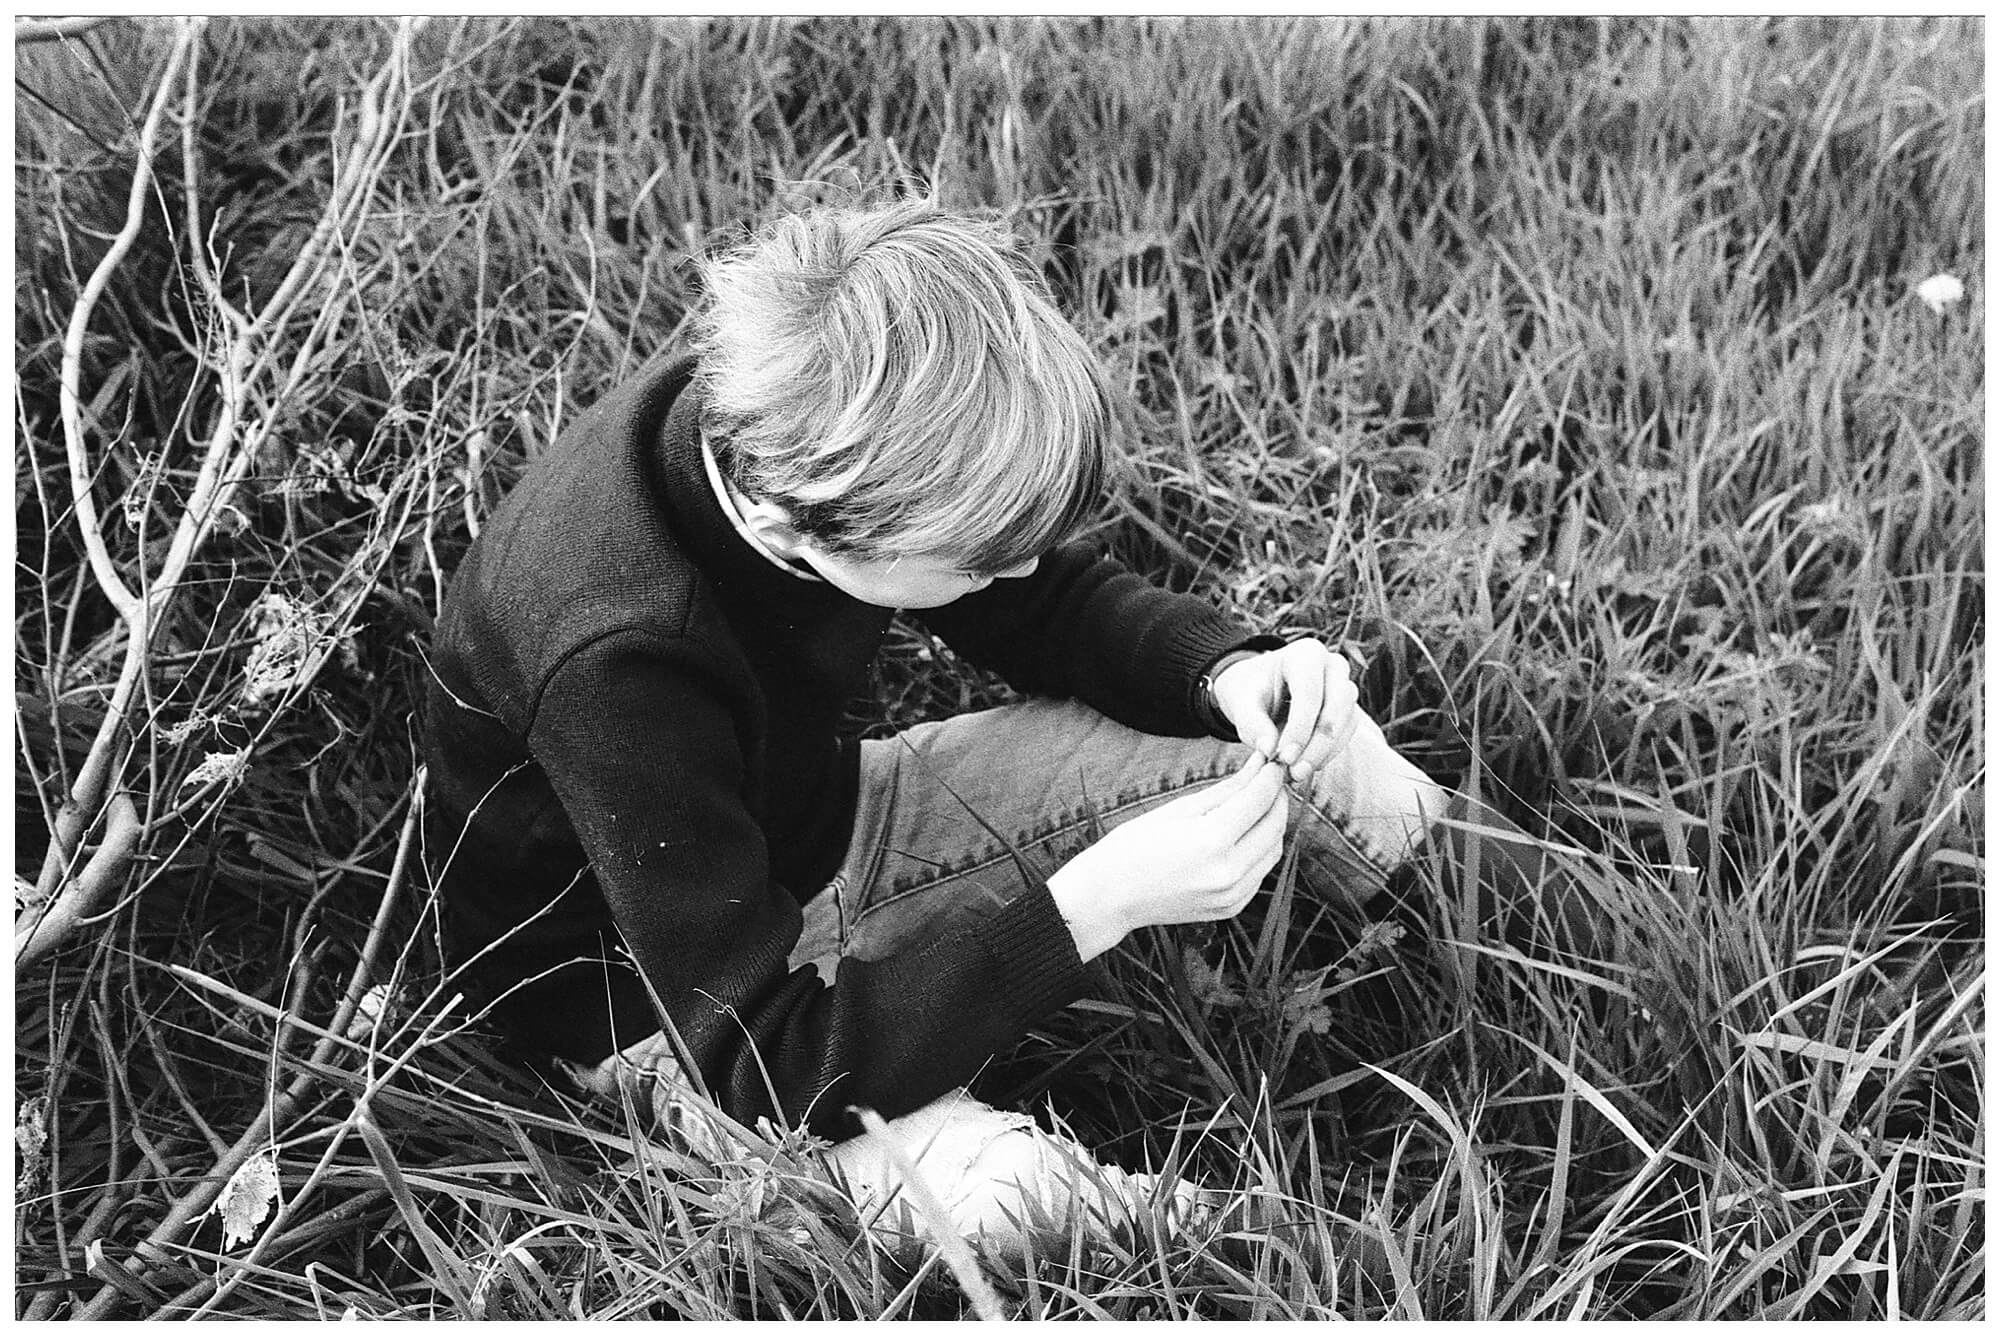 Black and white image of a young boy sitting amongst the tall grasses in a field in the French countryside.